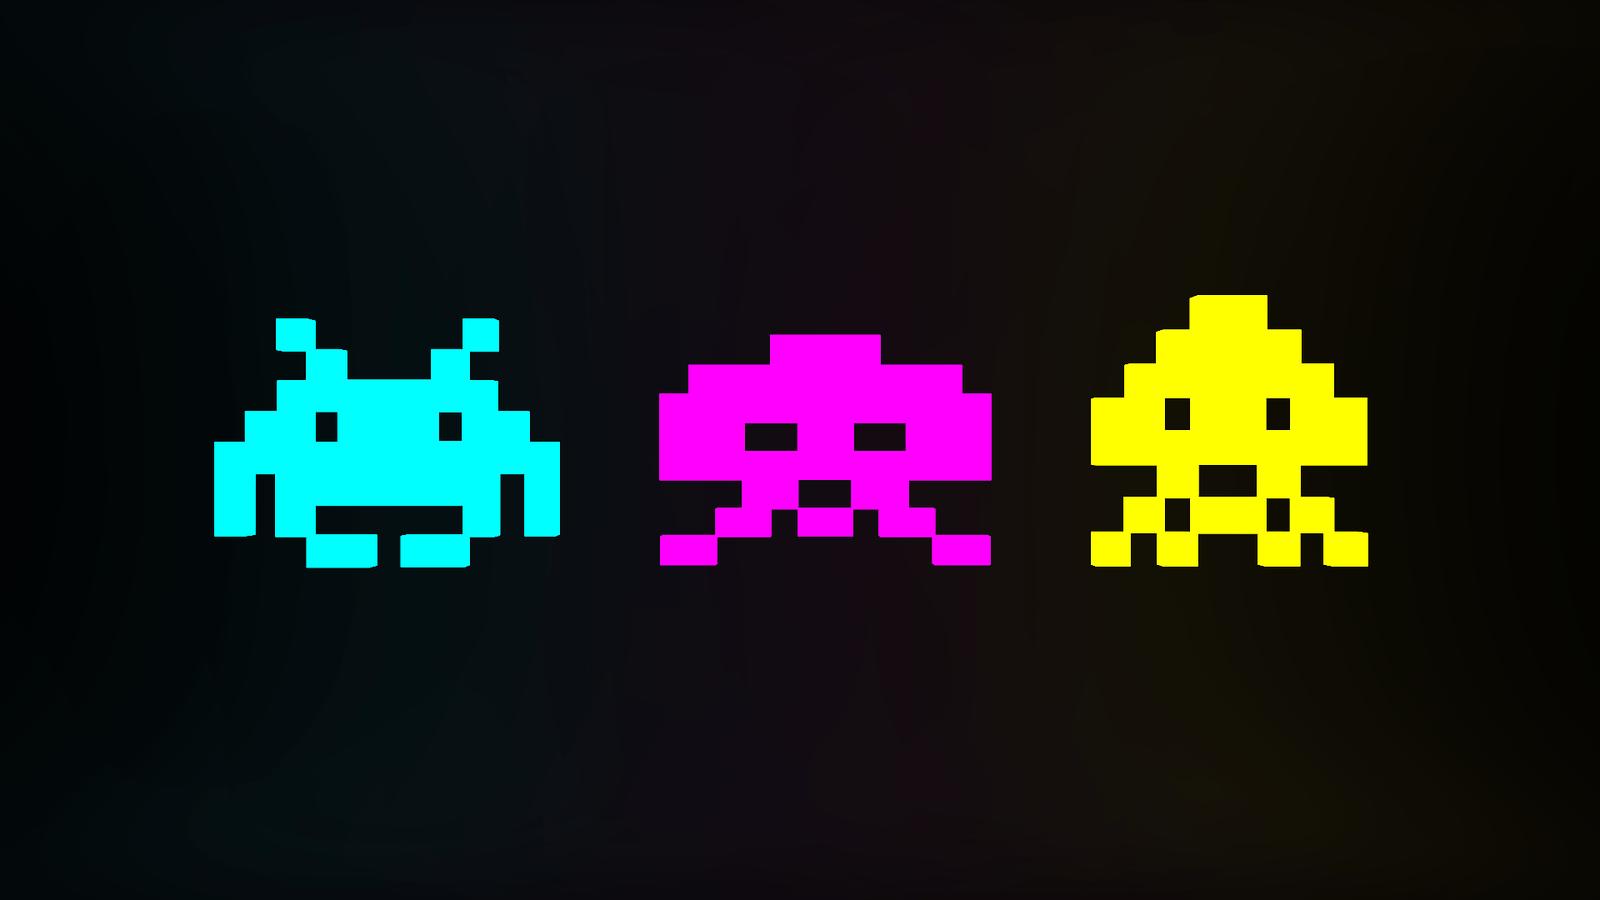 space invaders clipart - photo #26